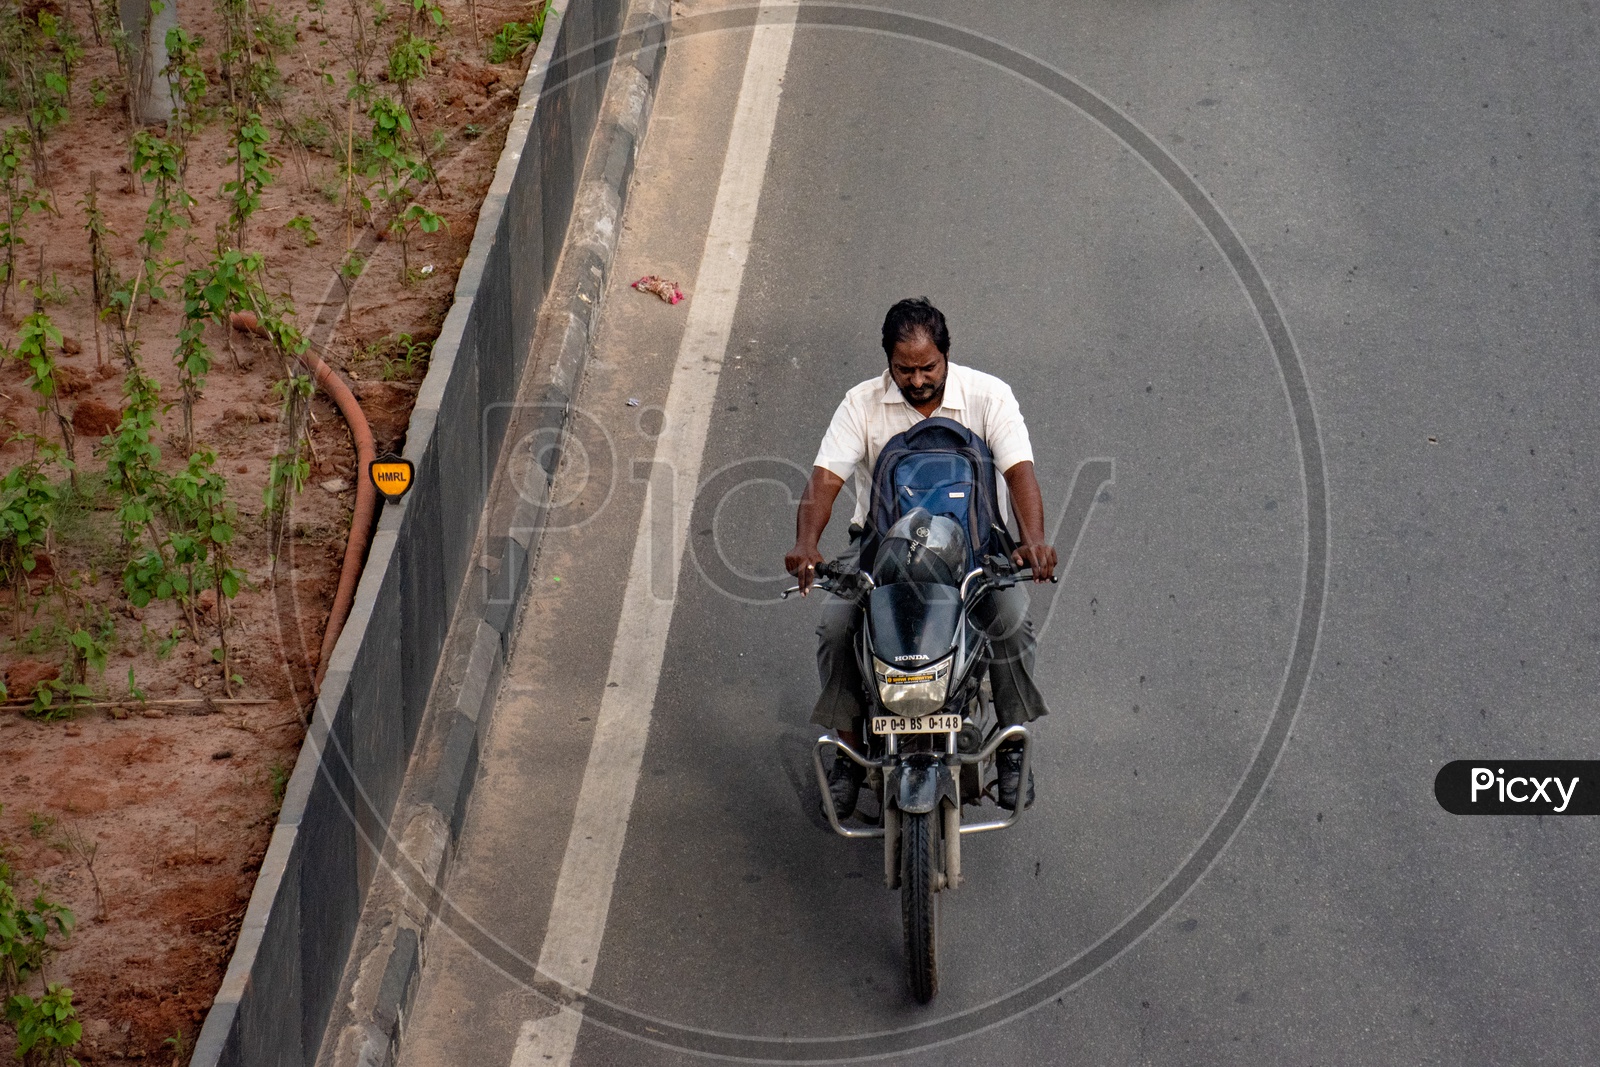 Riding a motor bike without wearing a helmet.